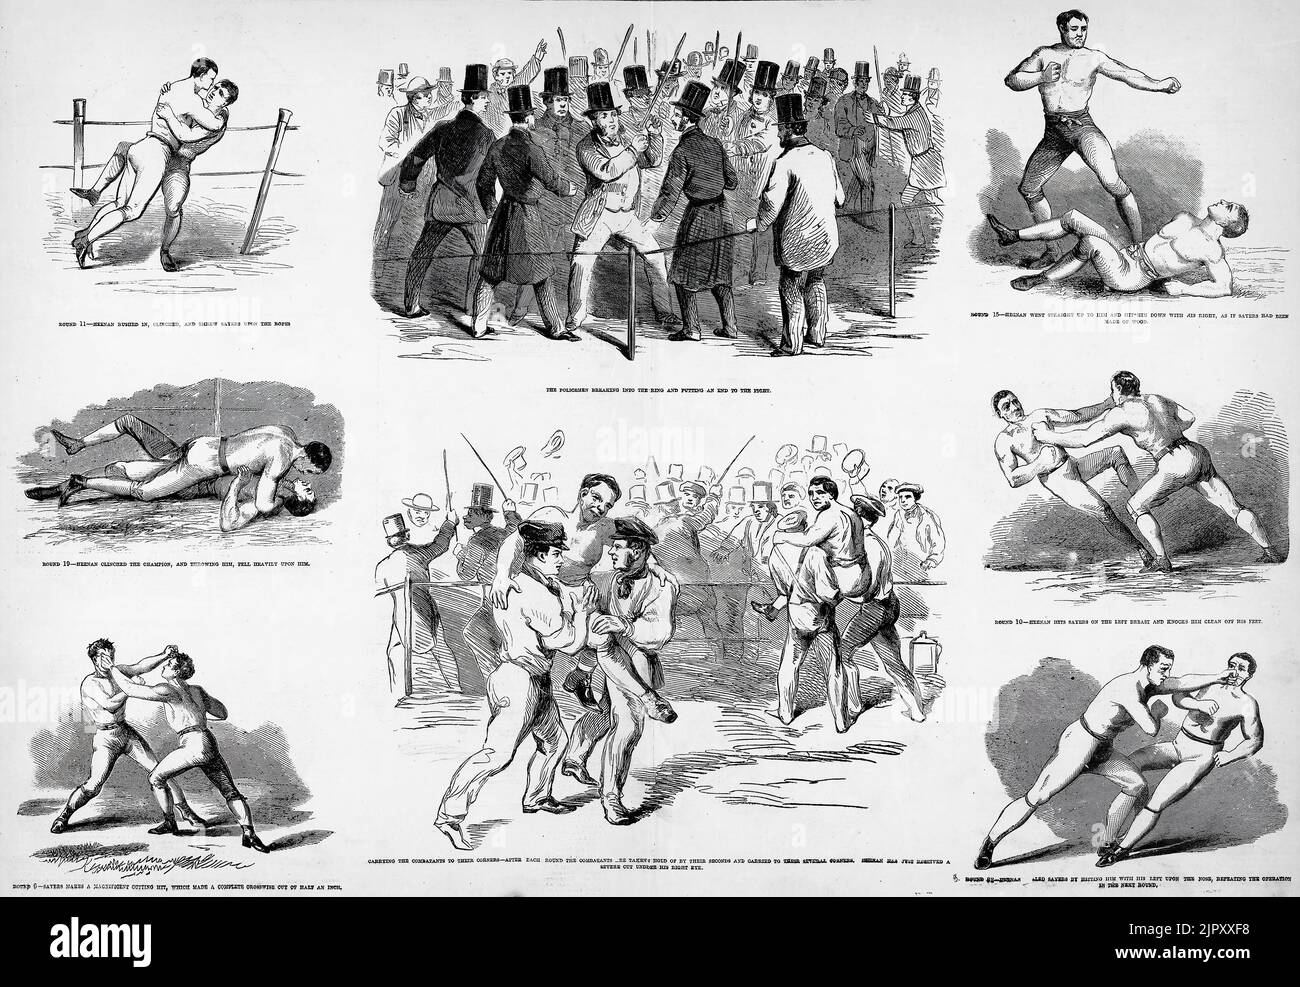 Scenes from the prize fight of John C. Heenan and Tom Sayers for the Championship Belt of England - Carrying the combatants to their corners - Round 6, 10, 11, 15, 19 and 32 - The policemen breaking into the ring and putting an end to the fight. April 17th, 1860. 19th century illustration from Frank Leslie's Illustrated Newspaper Stock Photo